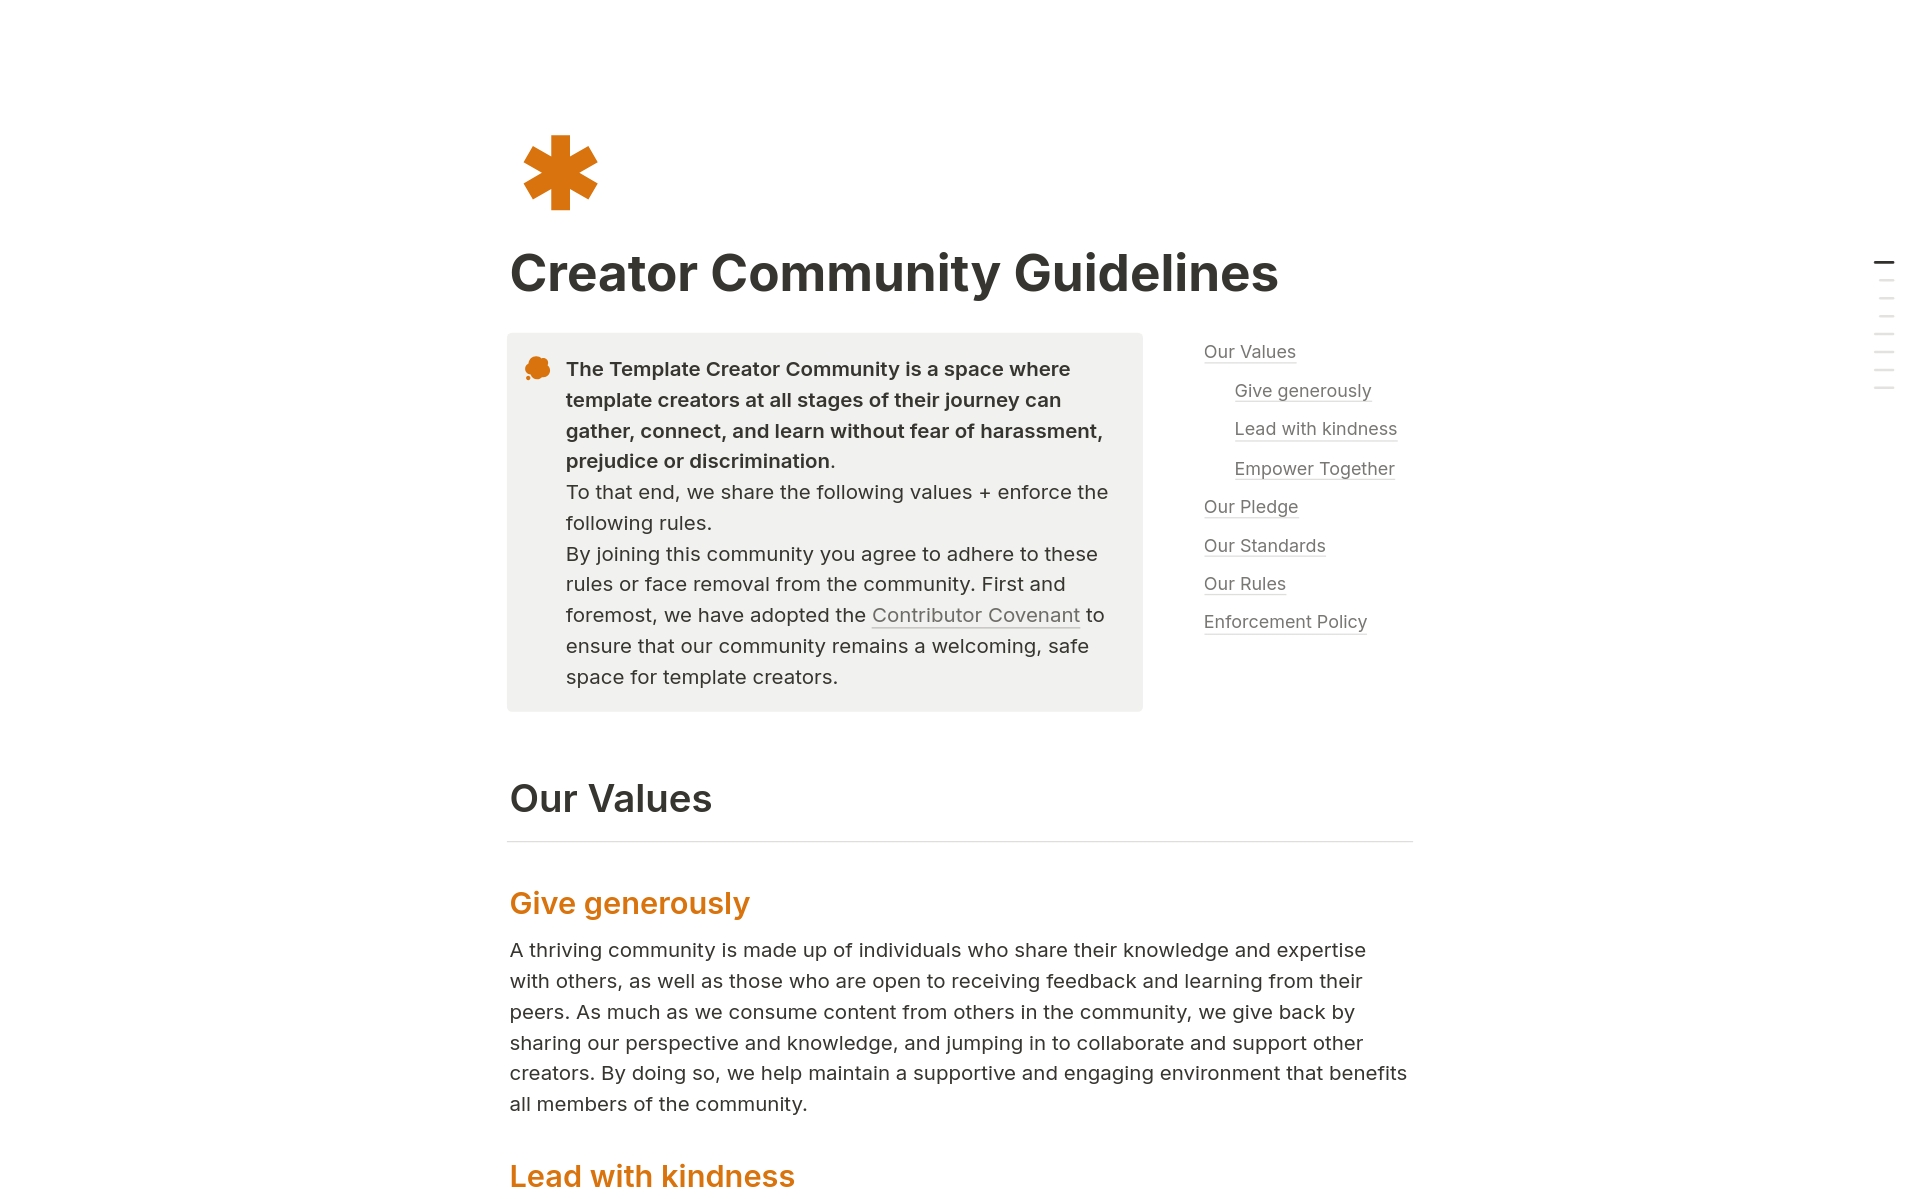 Clear and concise community guidelines template to ensure a respectful and safe environment.